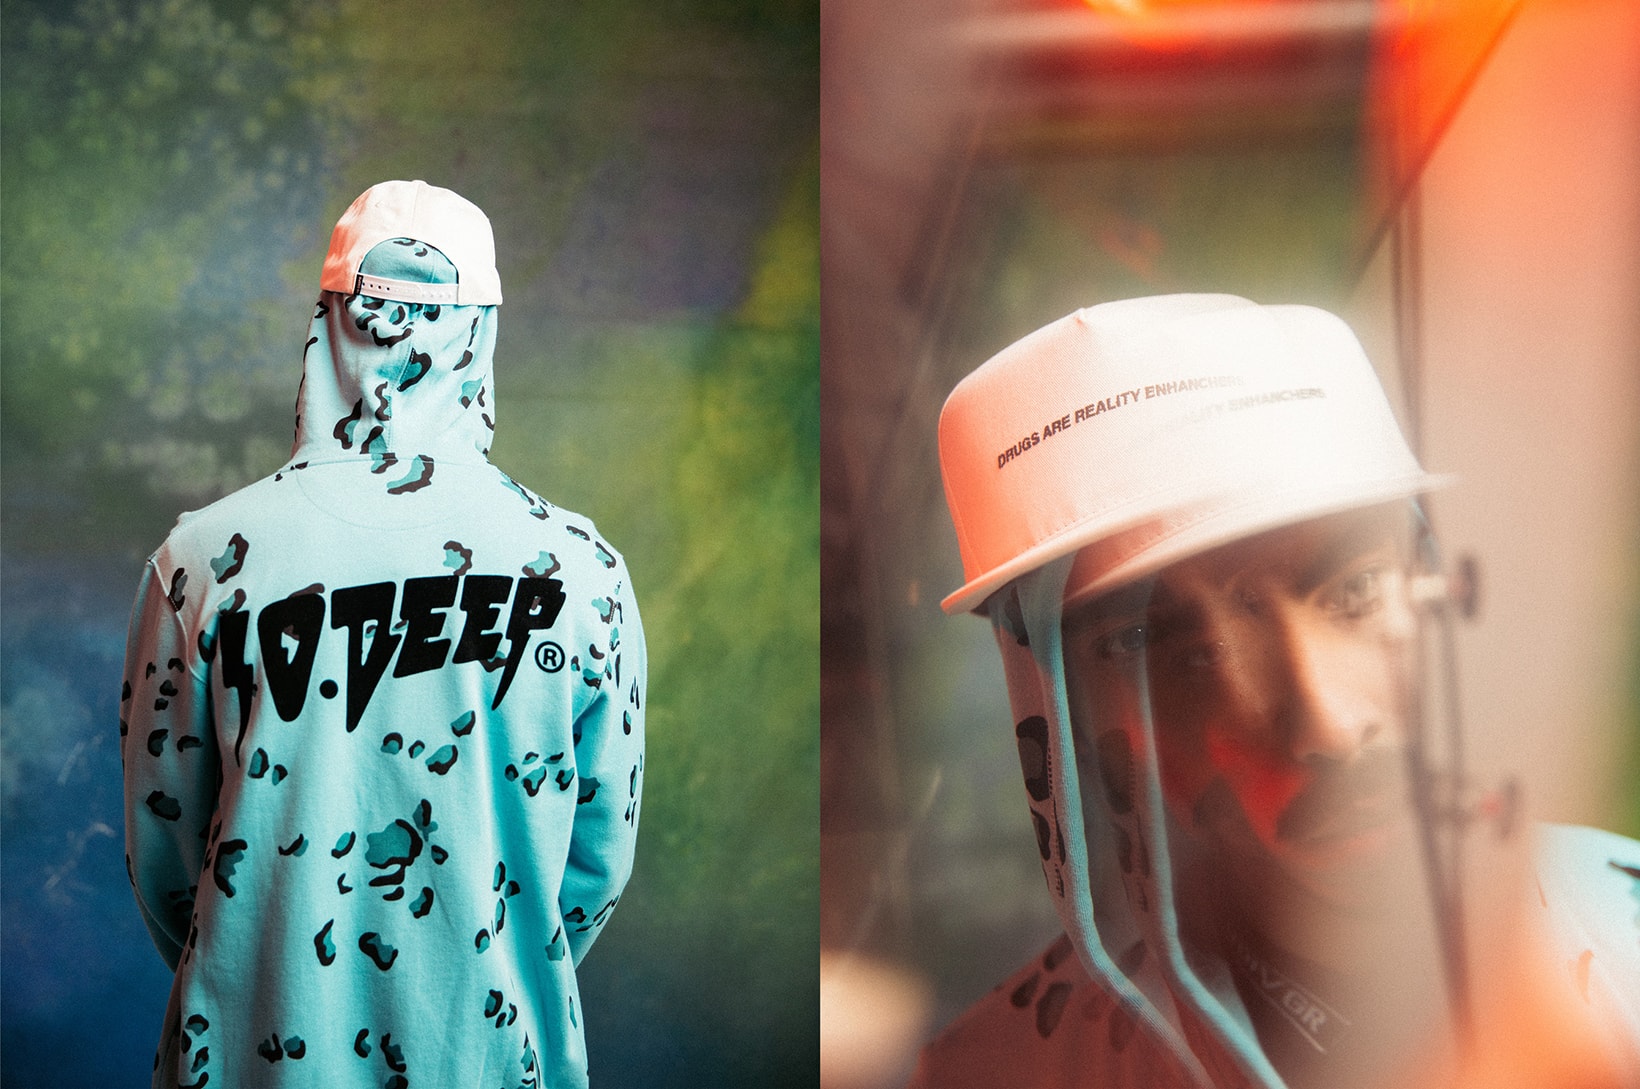 10 Deep Spring Summer 2018 Delivery 2 Lookbook collection release date info drop psychedelic